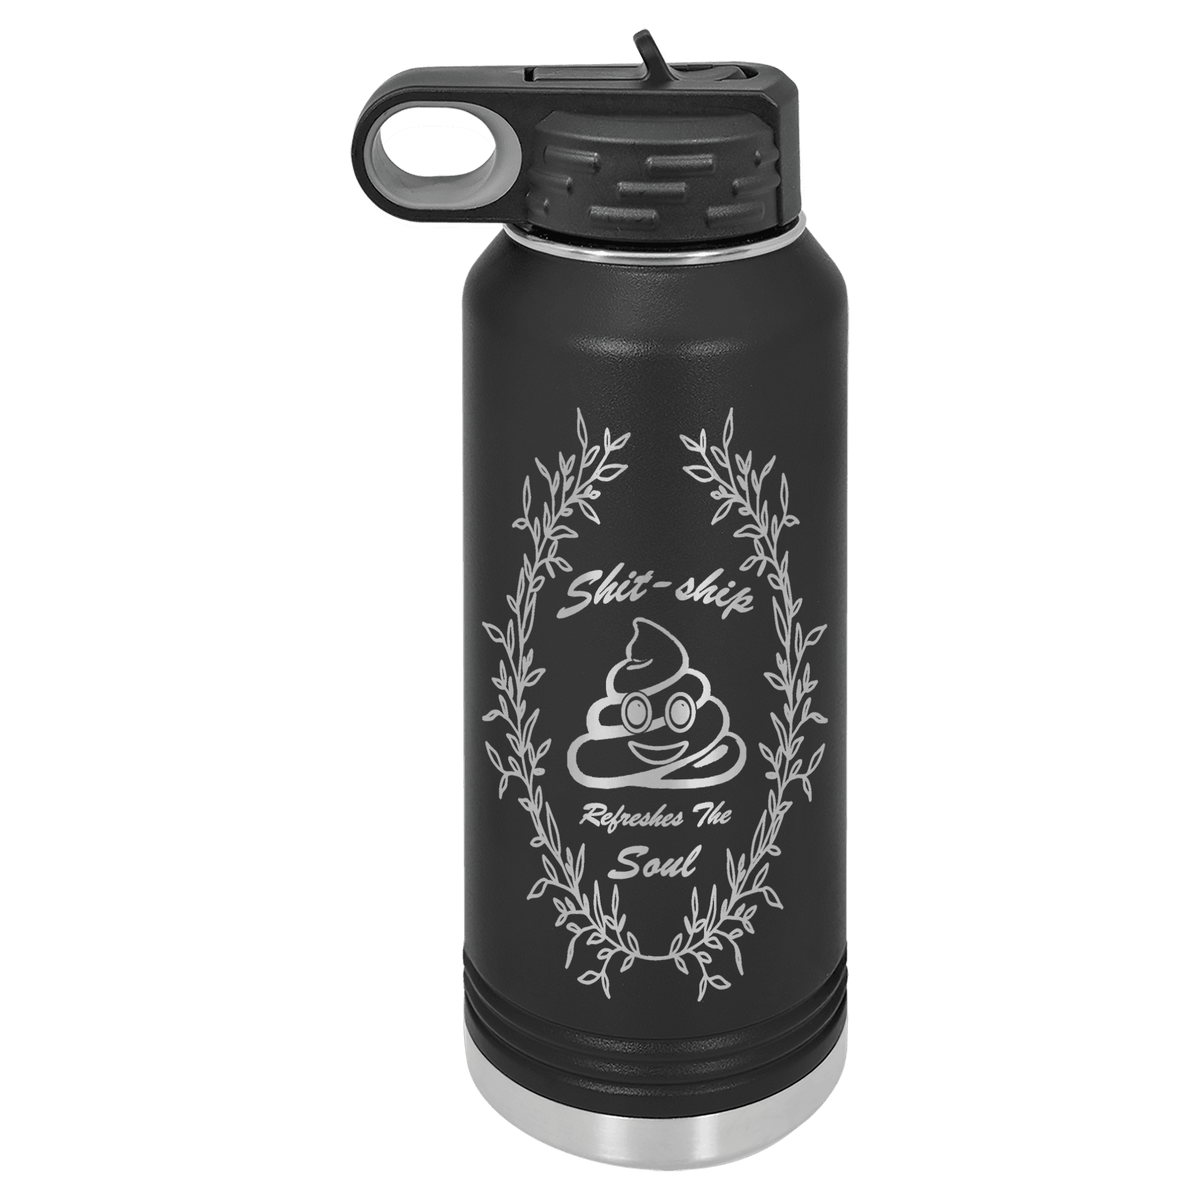 Designs by MyUtopia Shout Out:Shit-ship Refreshes The Soul 32 oz Polar Camel Water Bottle,32oz / Black,Polar Camel - 32oz Water Bottle